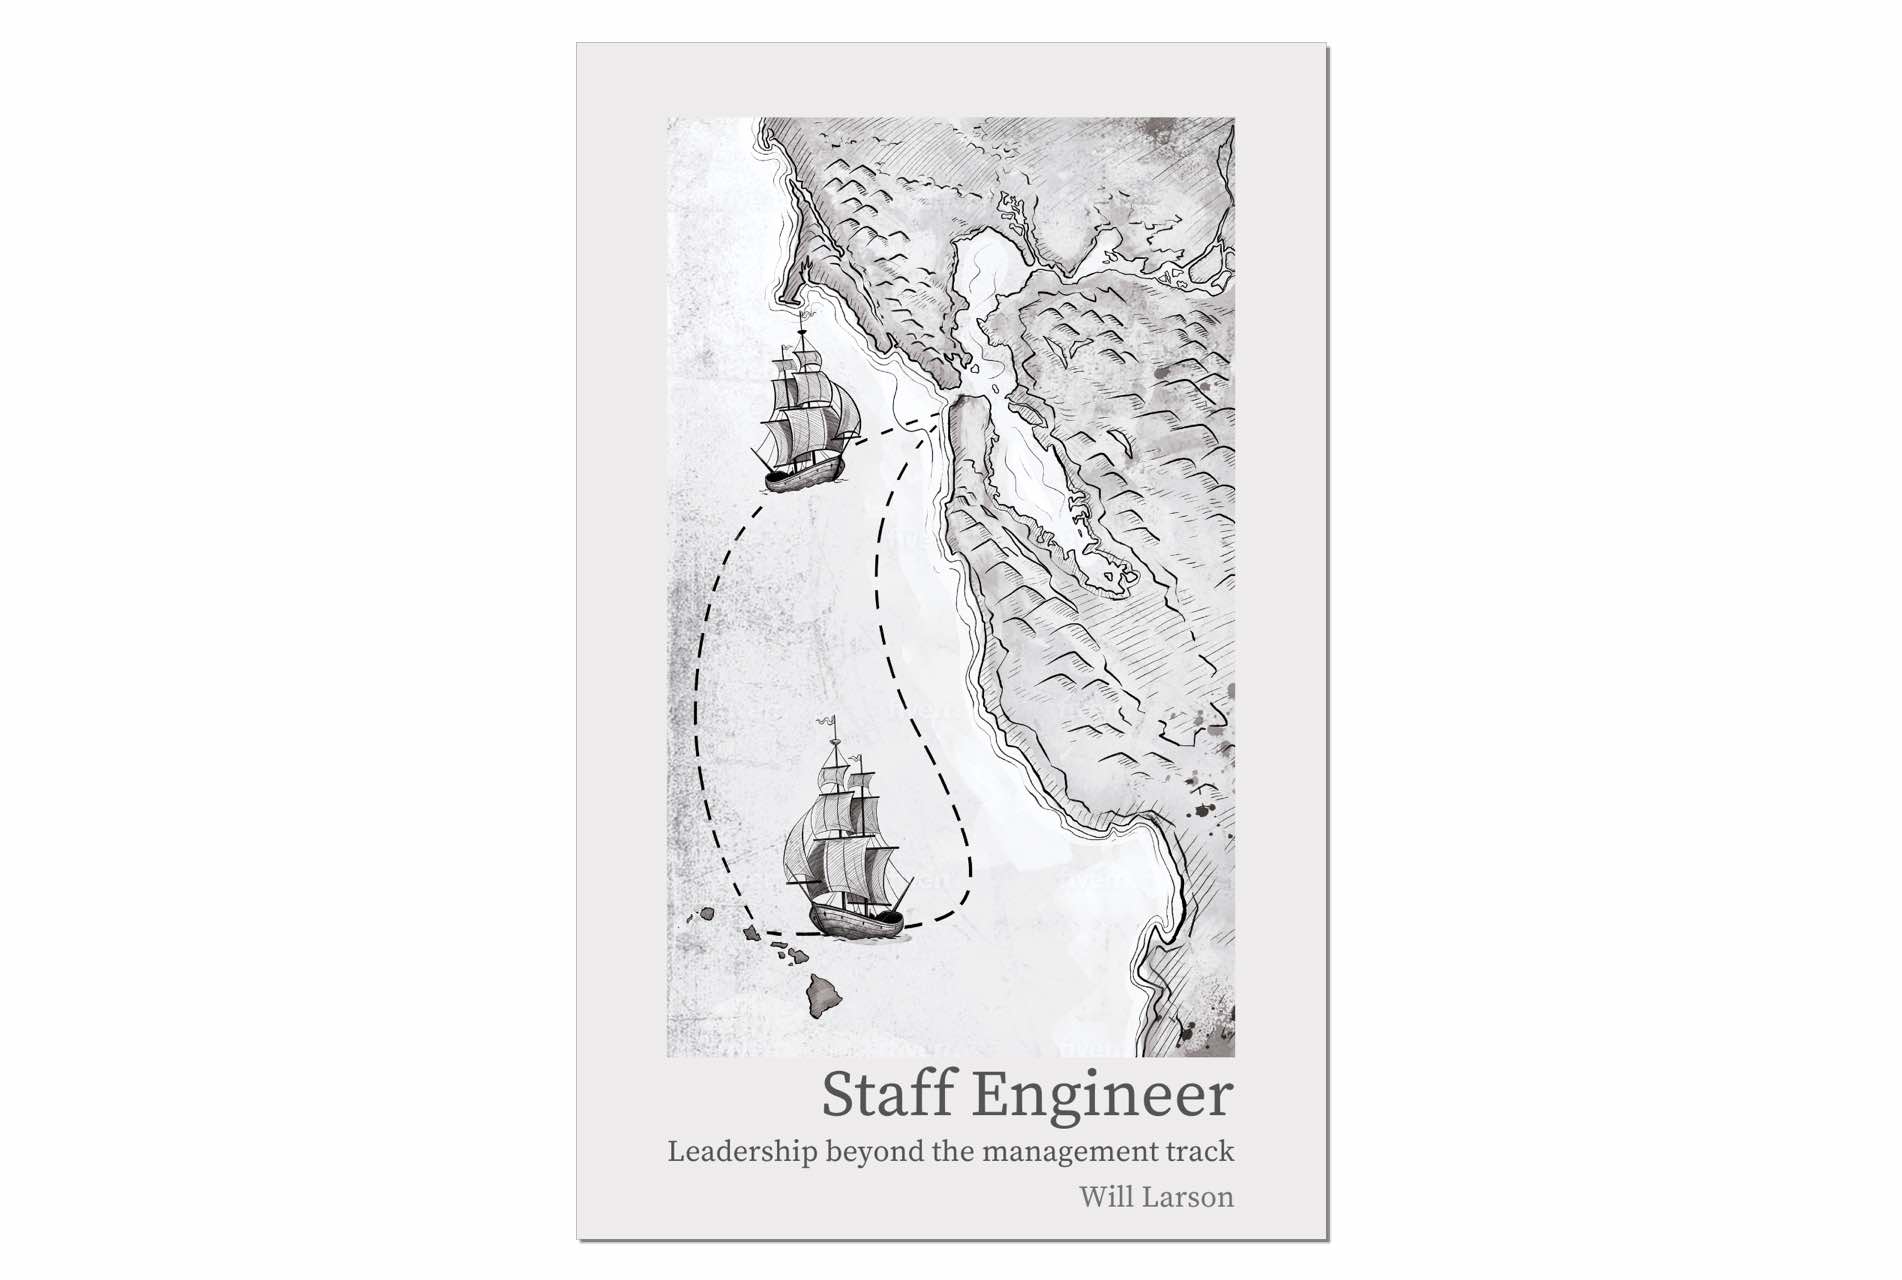 Staff Engineer book cover